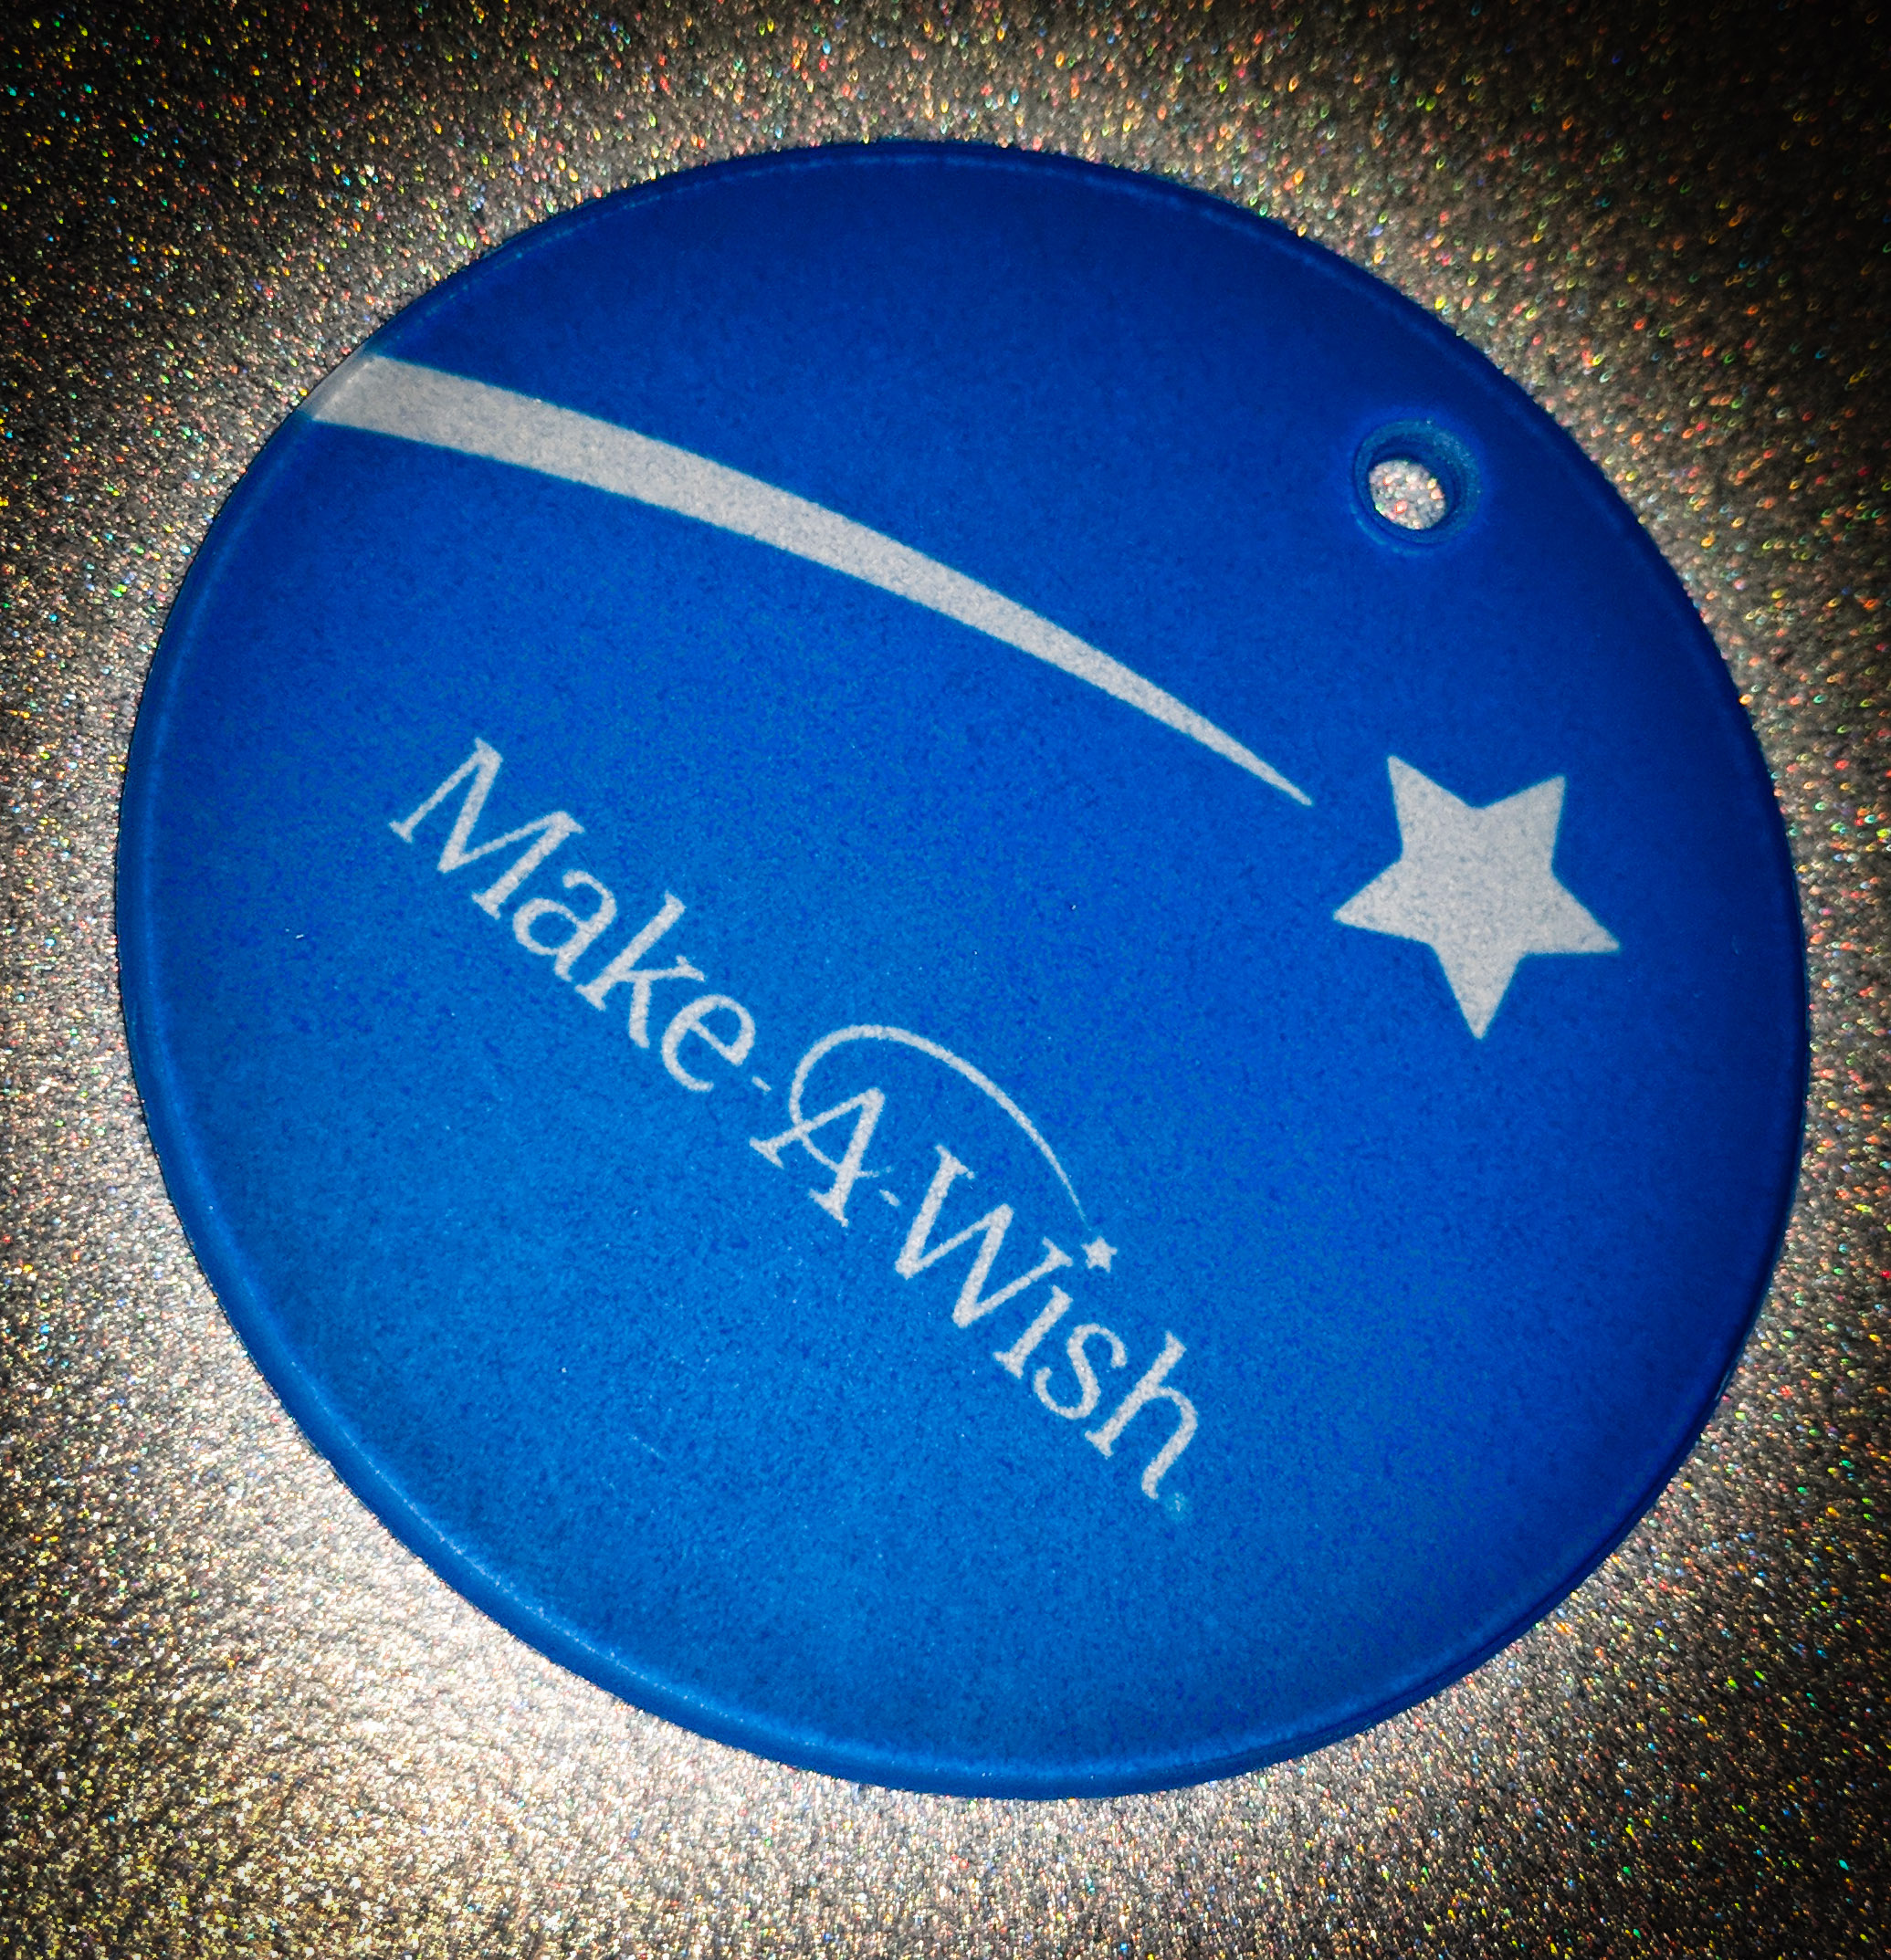 Make-A-Wish Ornament made with sublimation printing